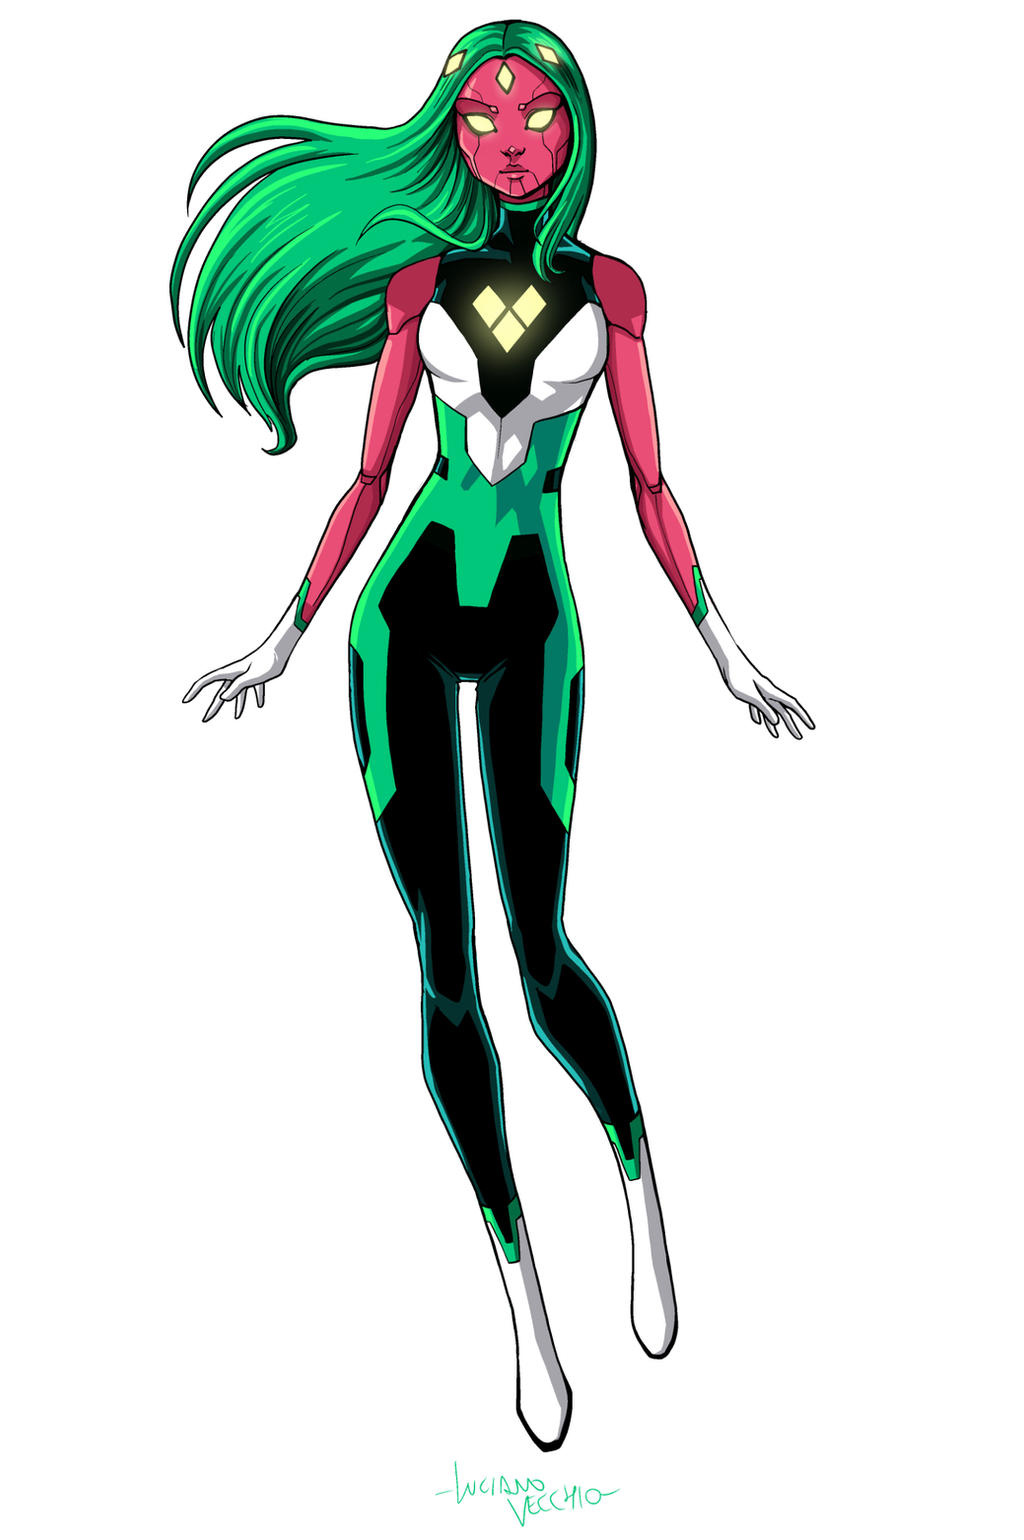 Viv Vision by LucianoVecchio on DeviantArt